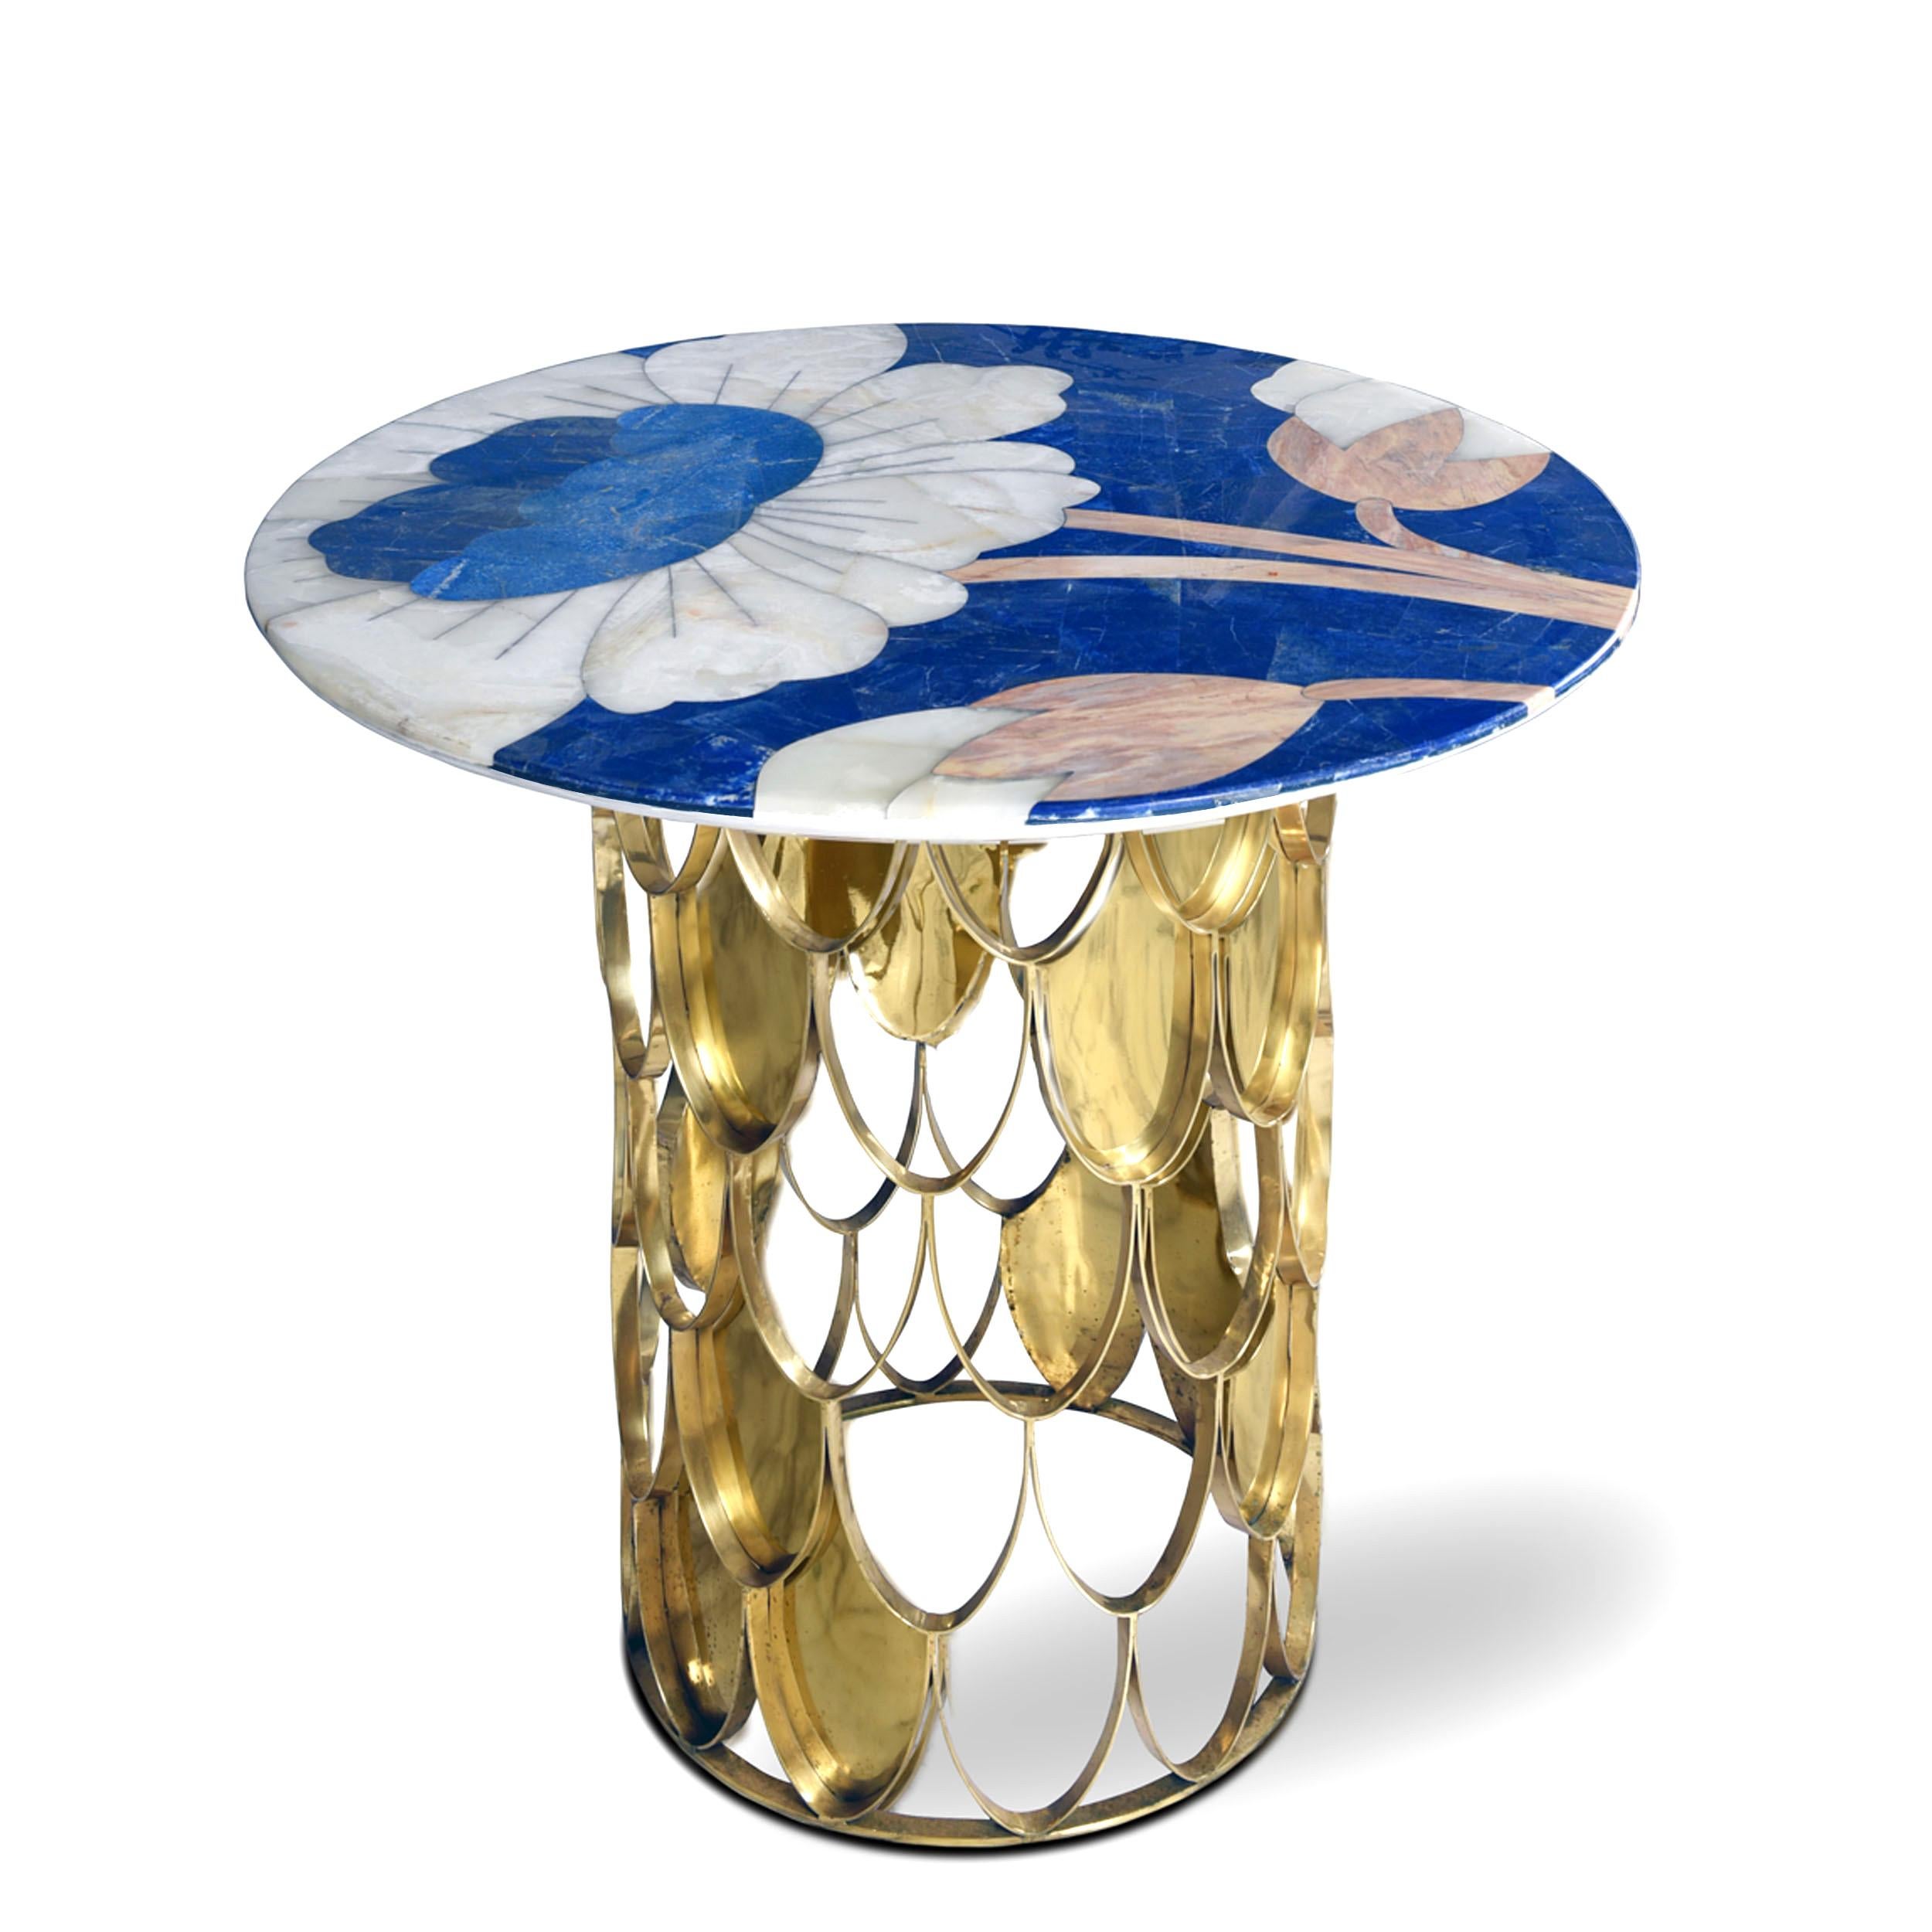 Puvvi foyer table by Studio Lel
Dimensions: D 91.5x H 91.5 x H 76 cm.
Materials: lapis lazuli, onyx, marble, brass.

From the Urdu word for the chrysanthemum flower, our Vogue-featuring Puvvi collection is a lively celebration of femininity. The